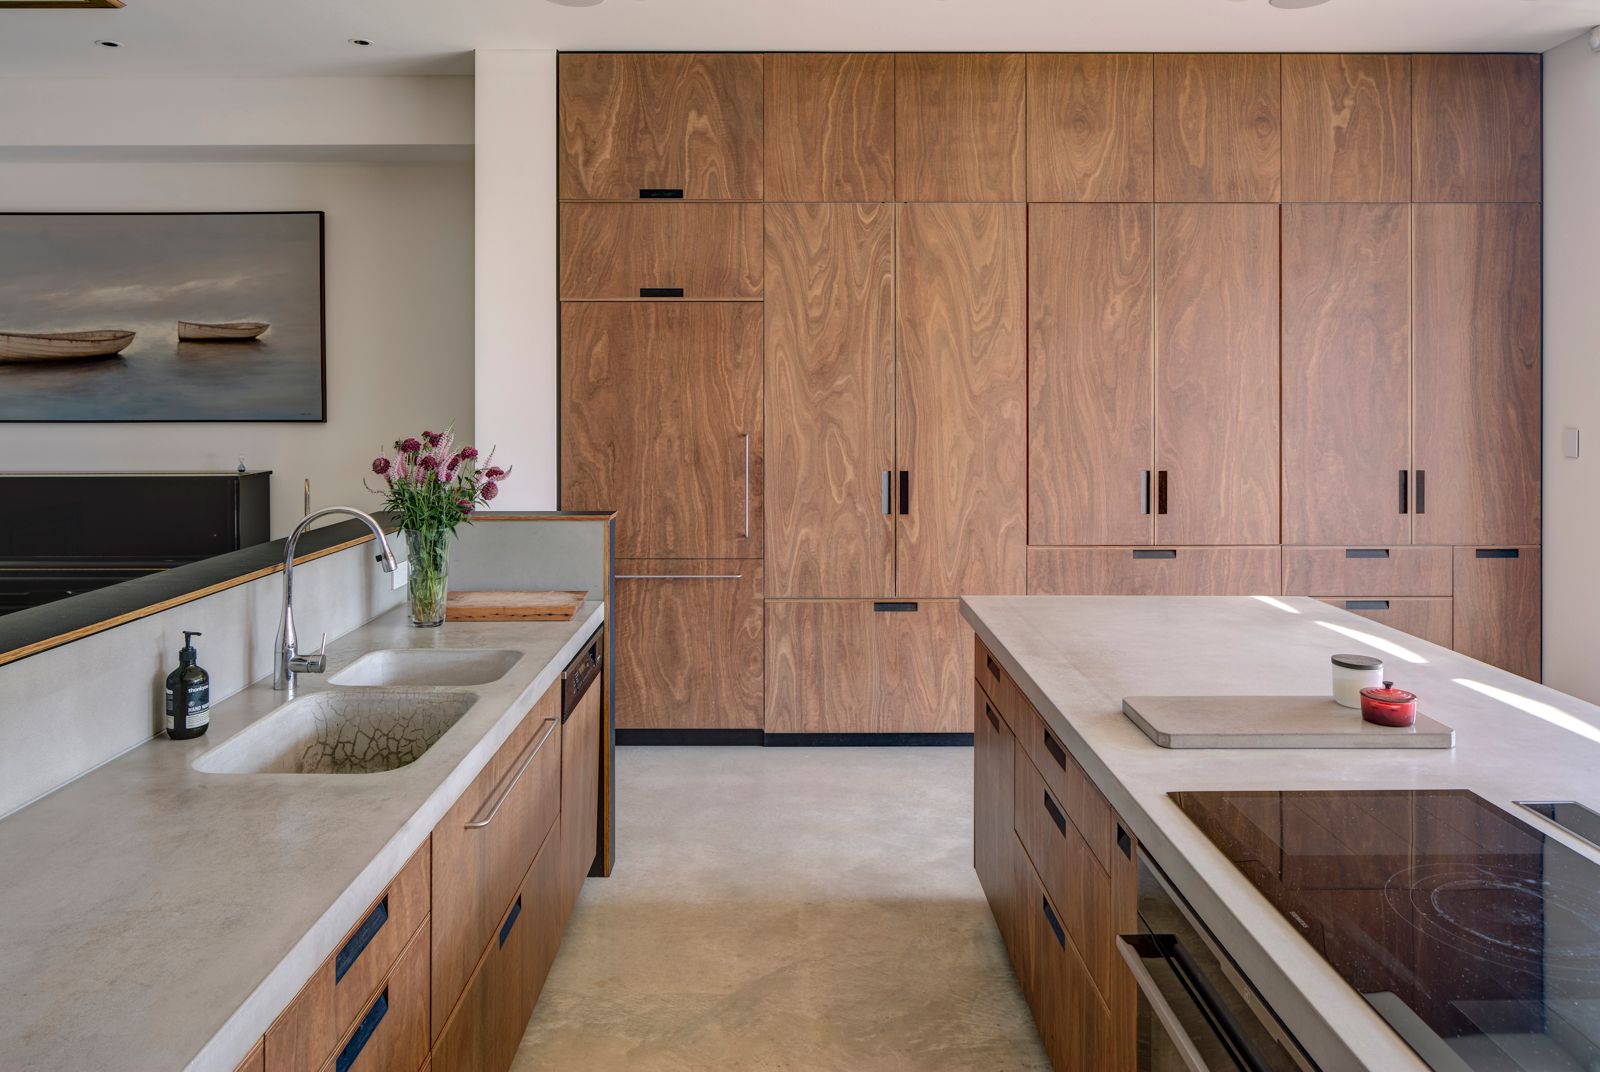 Sky House by Marra+Yeh Architects interior view of timber veneer kitchen